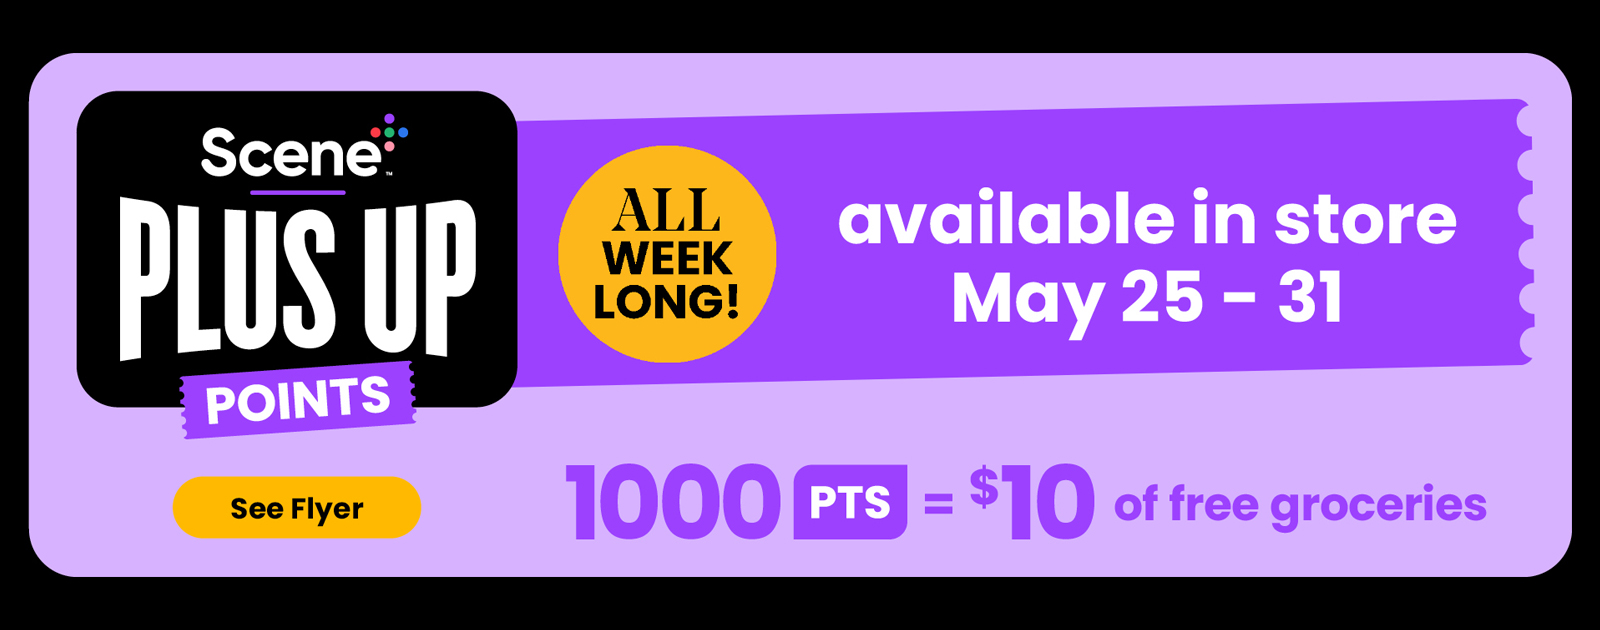 Scene Plus Up Points, All Week Long. 1000 Pts = $10 of free groceries